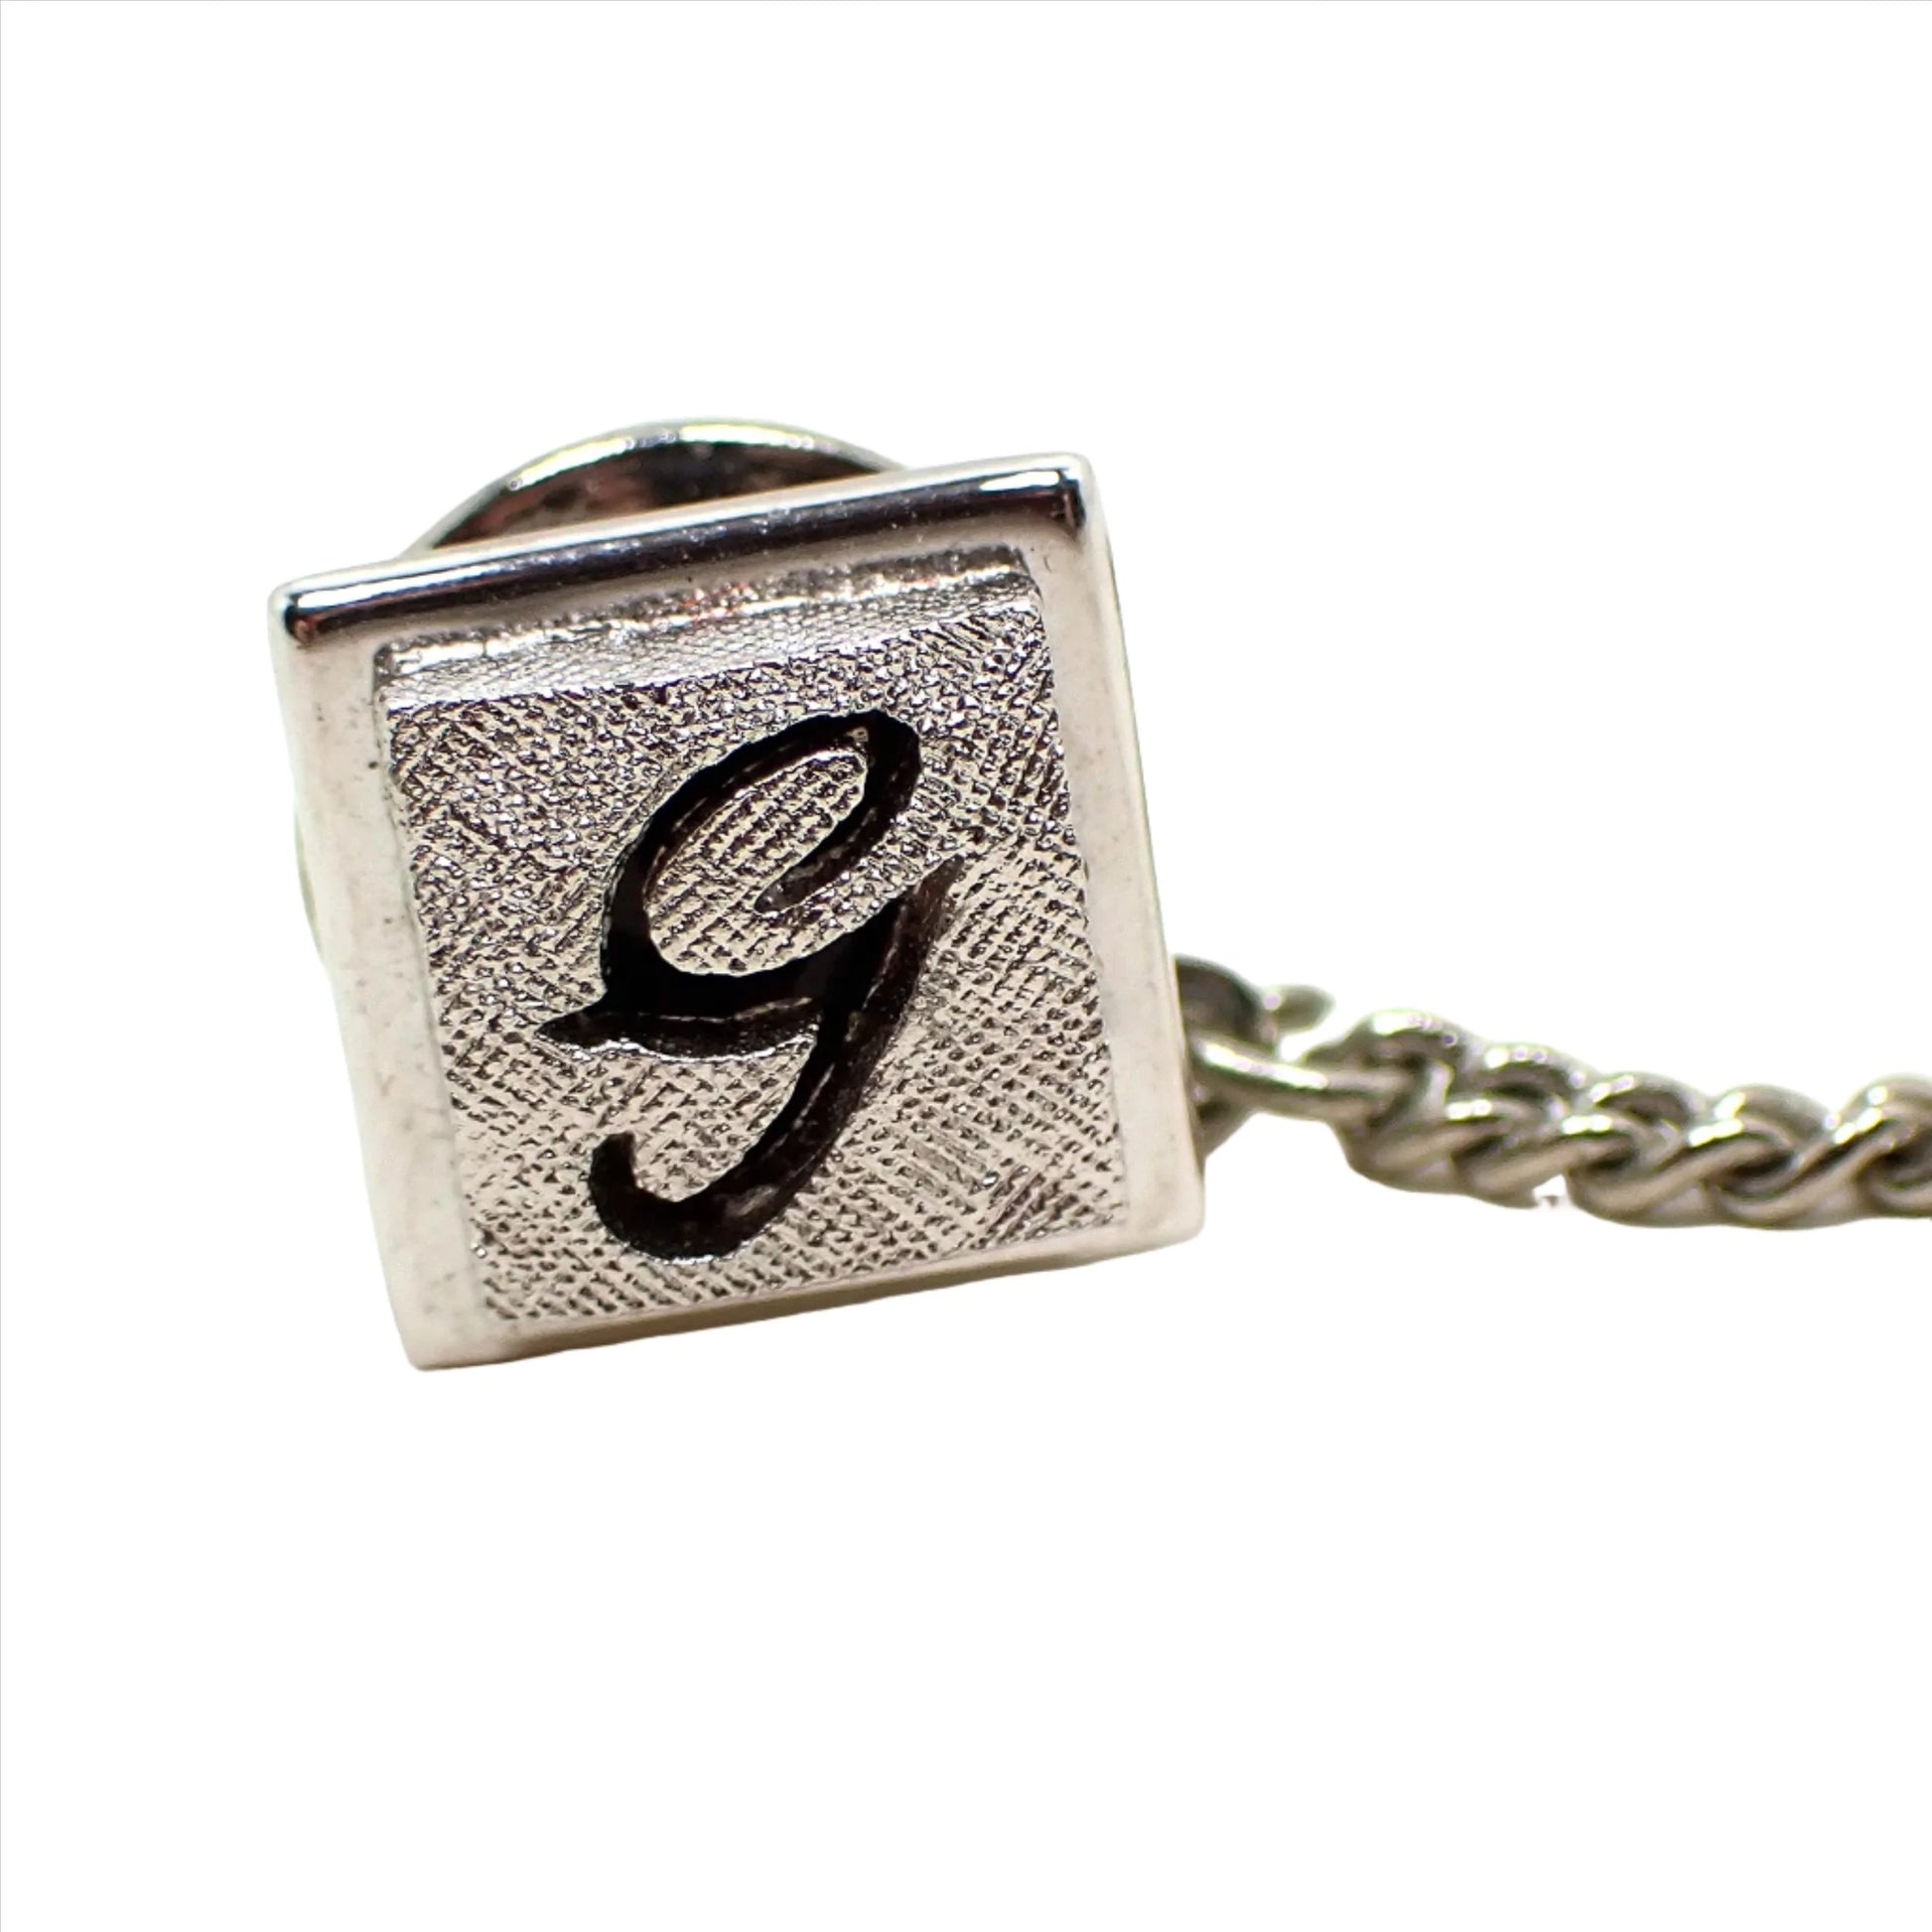 Enlarged closeup view of the Mid Century vintage Swank initial tie tack. It is square and silver tone in color. The front has a matte textured appearance with a cut out of the letter G in the middle. The metal behind the letter is painted black and shows through.